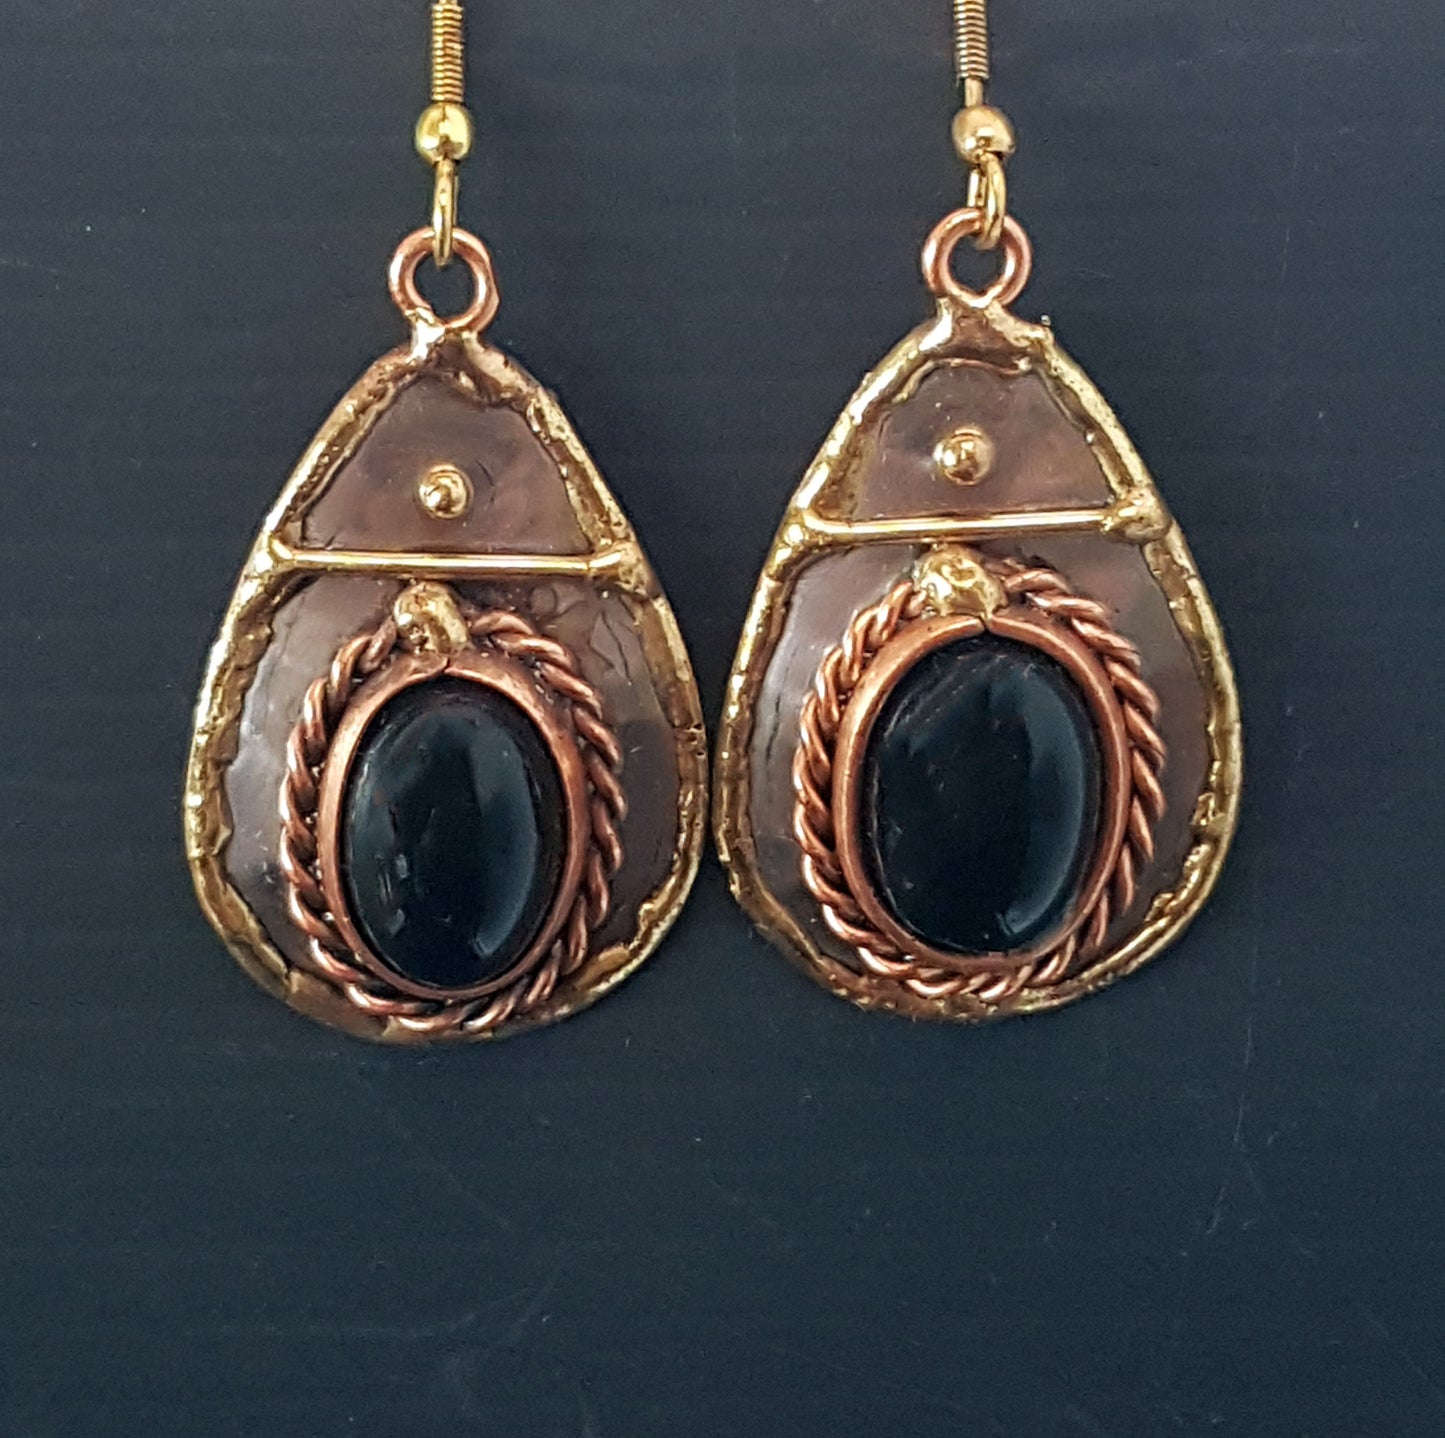 Silver & mixed metal tear drop shape earrings with black onyx oval stones. Hand crafted design in brass, copper and silver.